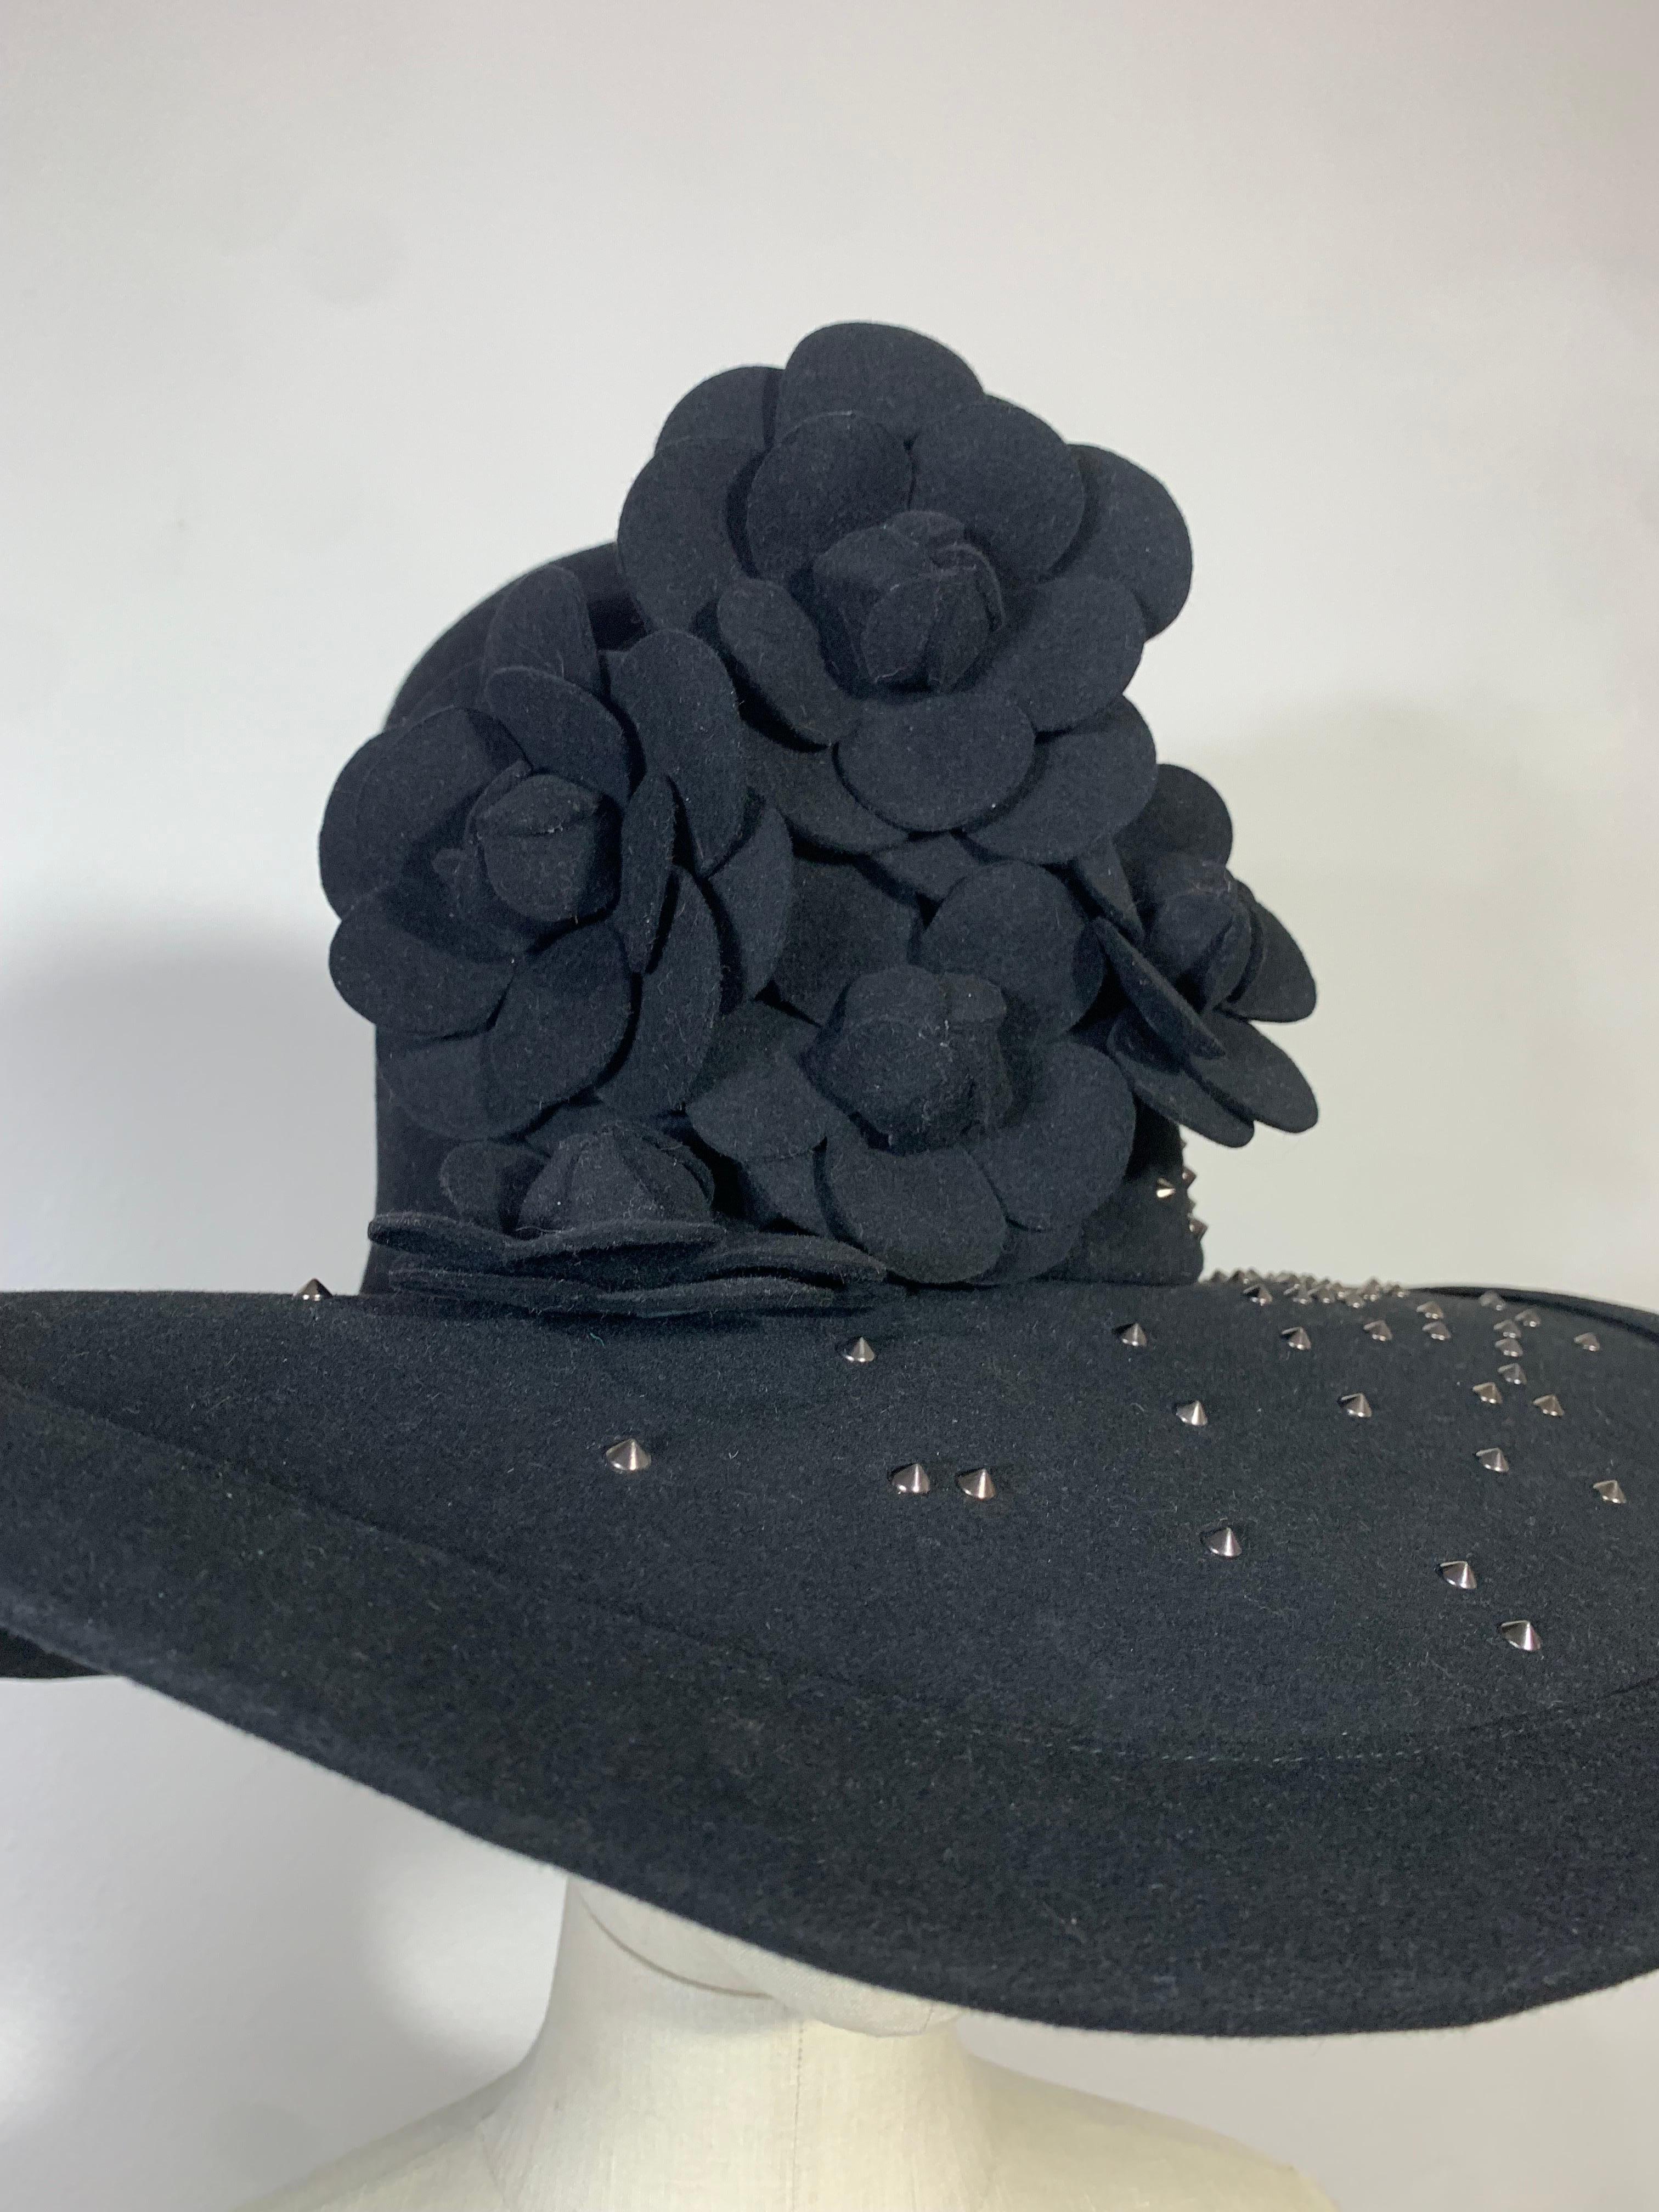 Maison Michel Black Large Brimmed Felt High Crown Hat w Studs & Camellia Flowers In Excellent Condition For Sale In Gresham, OR